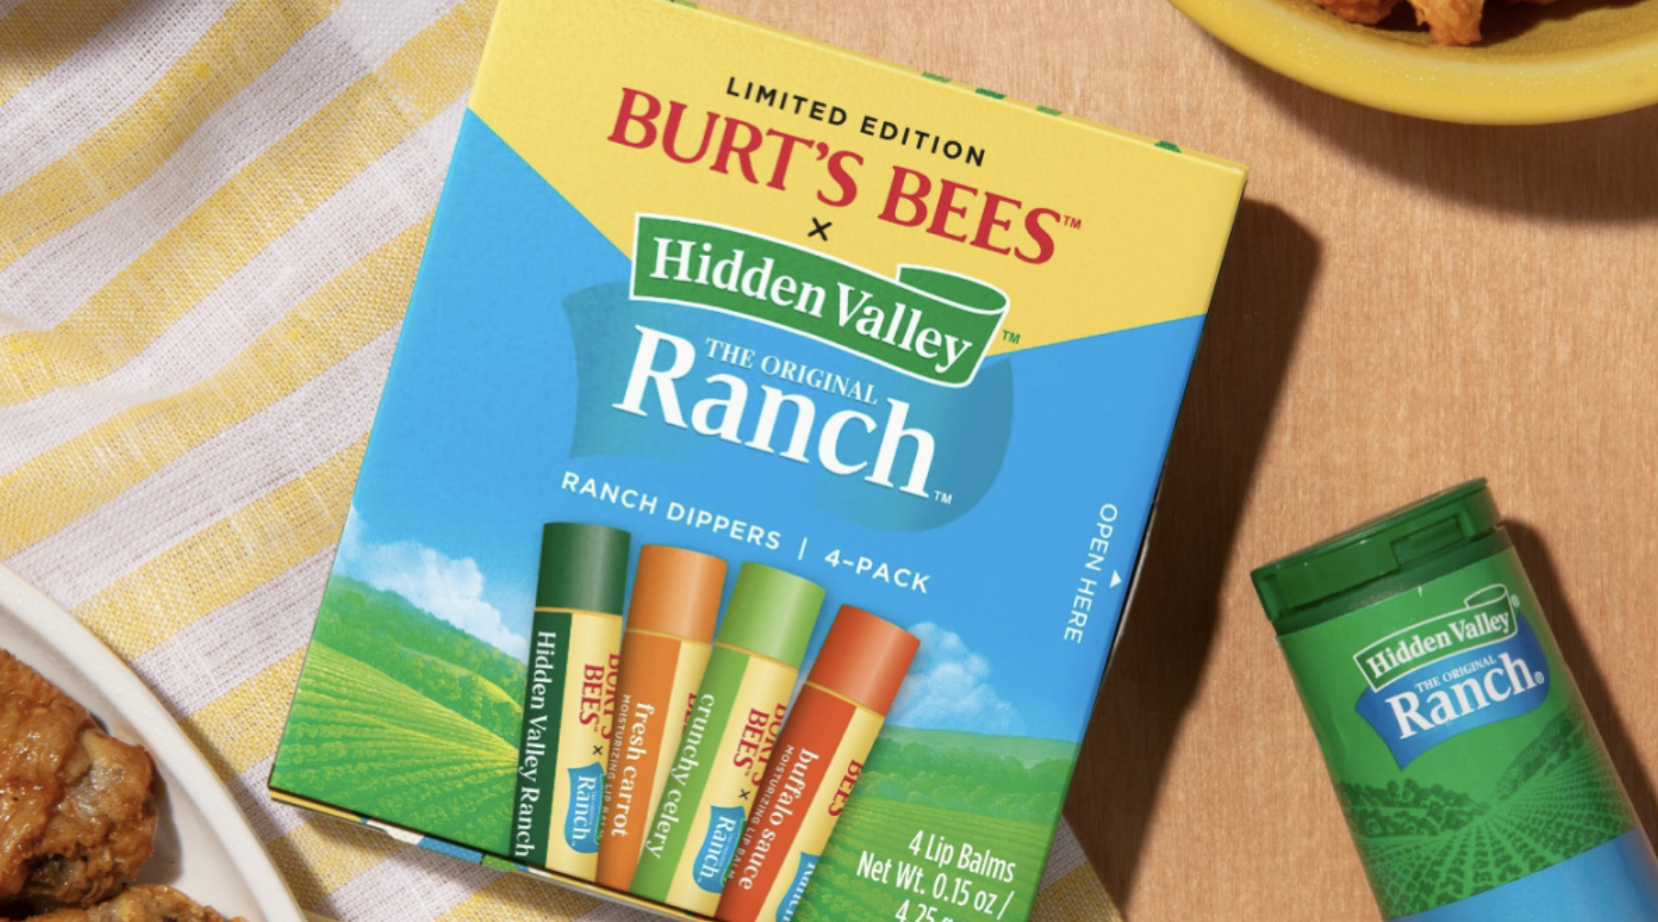 Burt’s Bees Has Teamed Up With Hidden Valley Ranch To Bring Us Chicken Wing Lip Balm